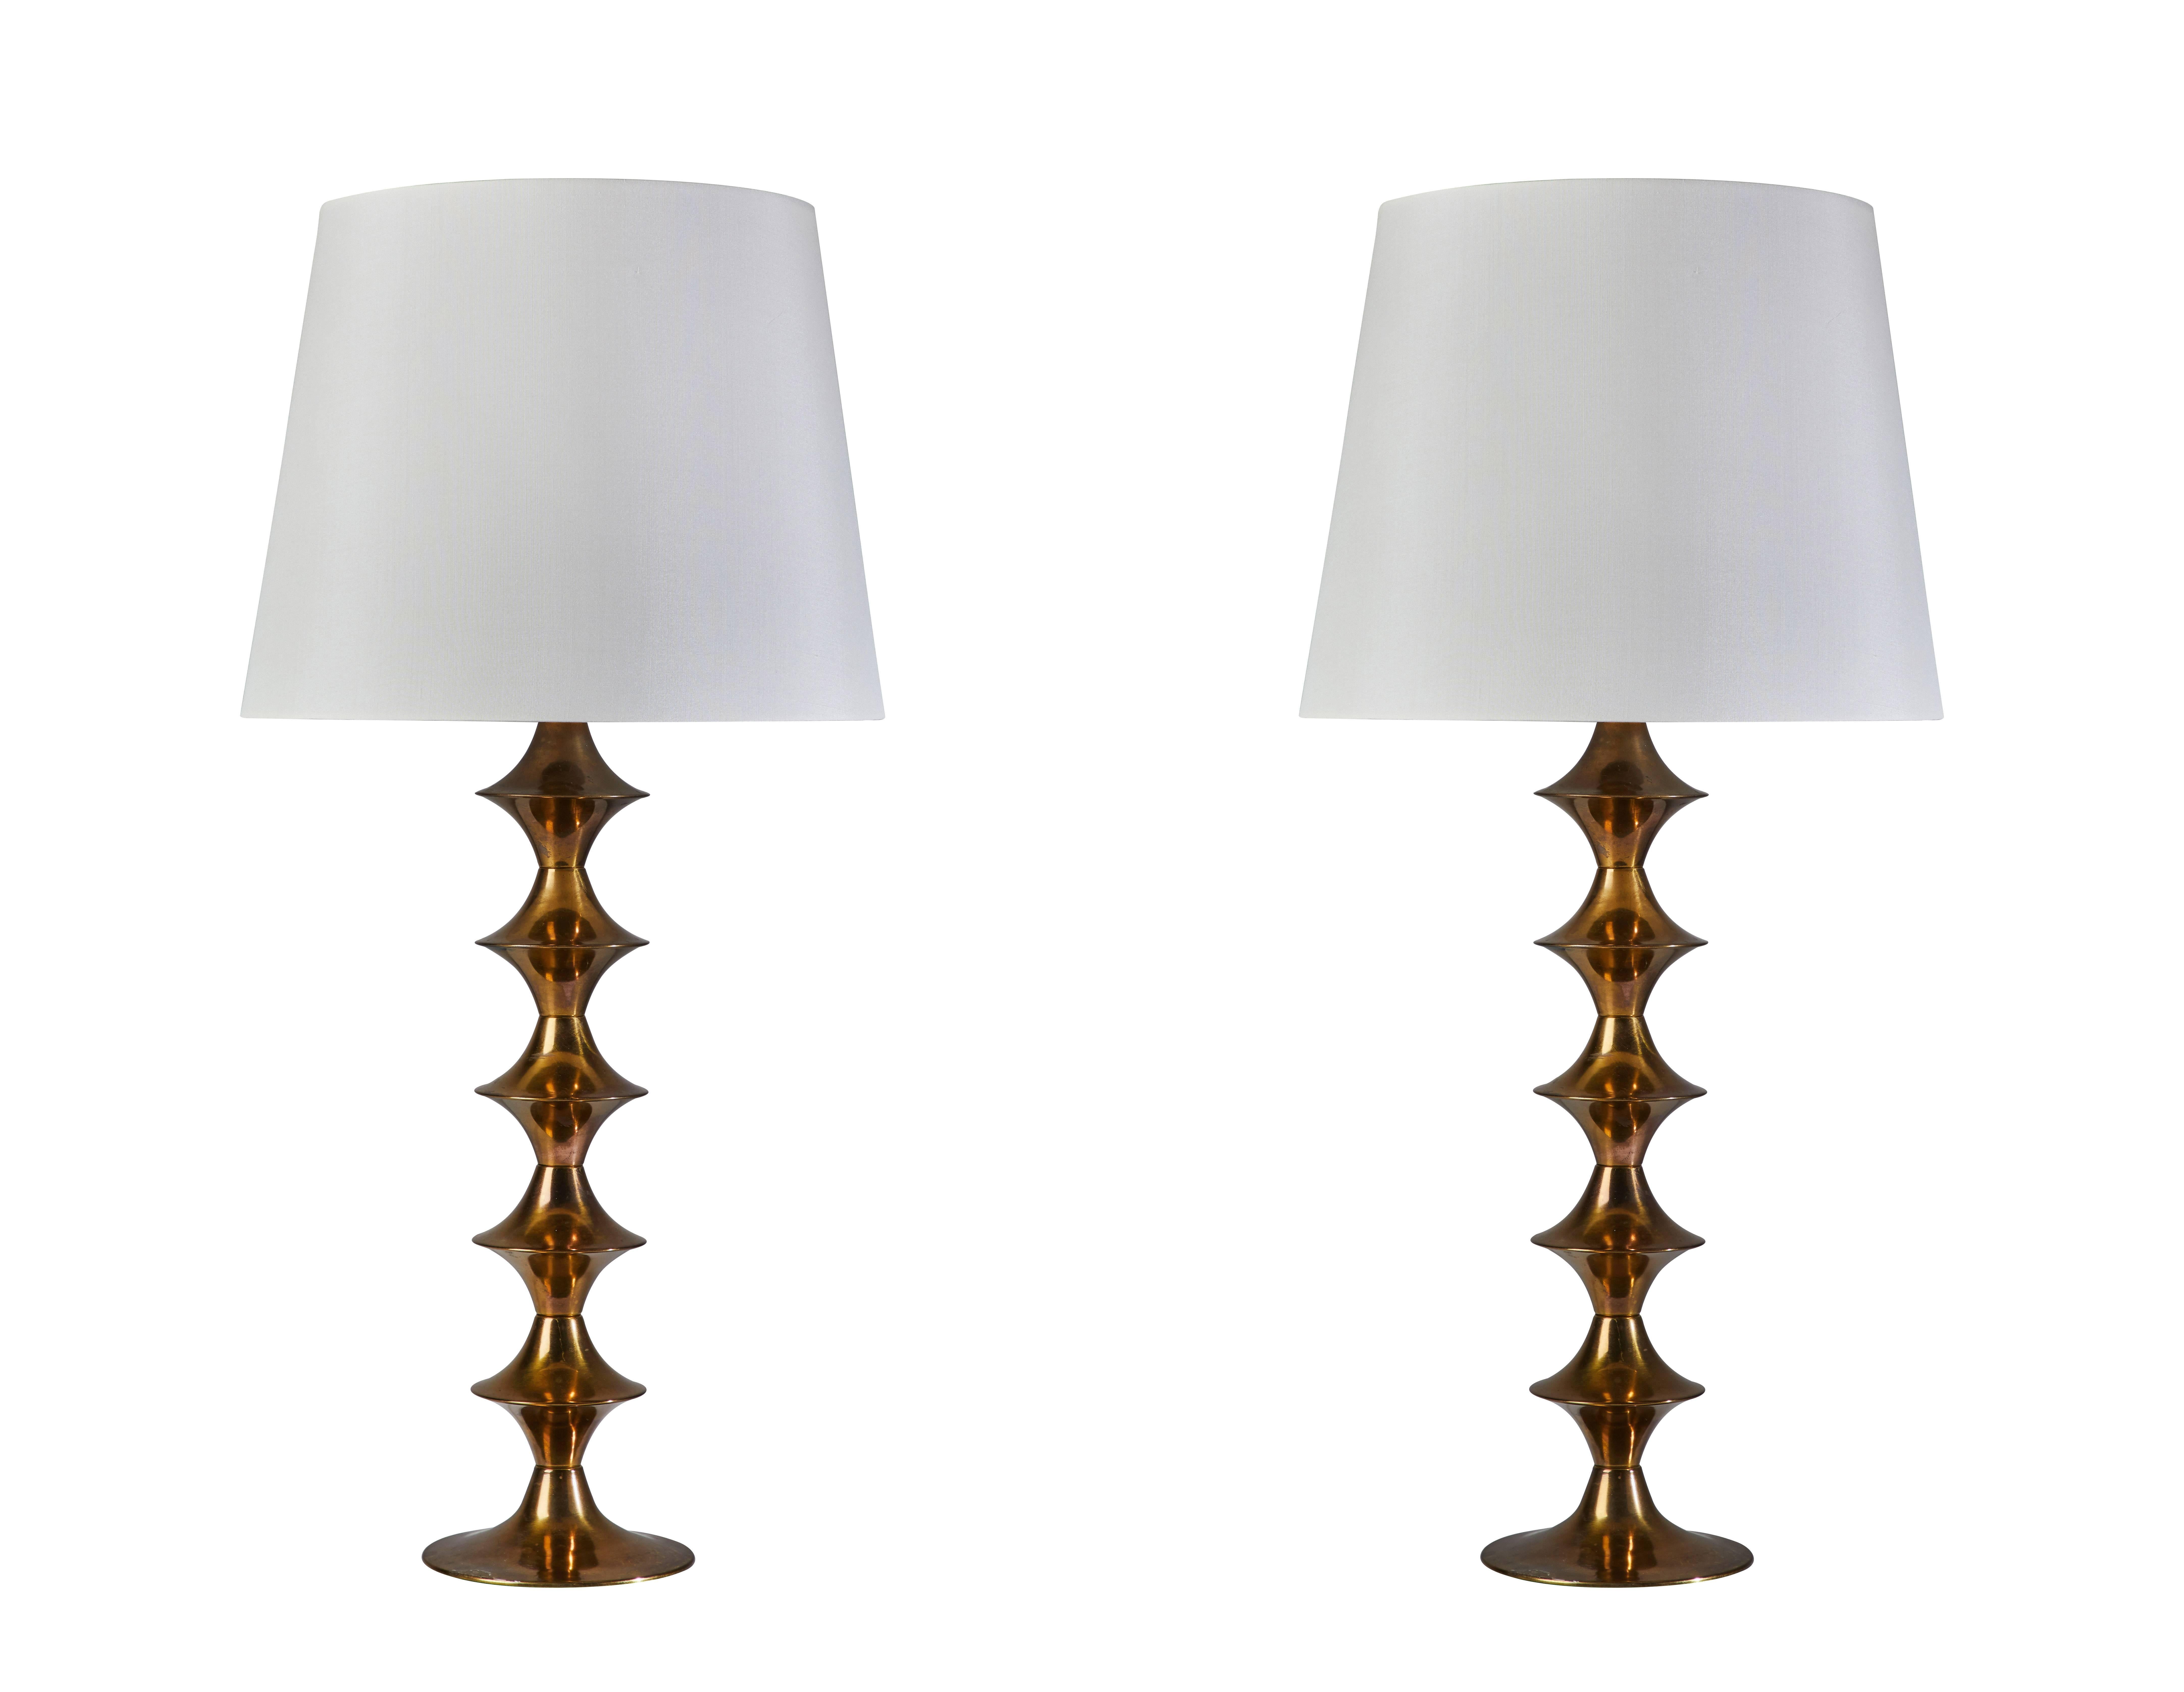 Pair of brass table lamps by Hans Agne Jakobsson designed and manufactured in Sweden circa 1950s. Patinated brass stems with custom fabricated silk shades. Original cords. Each light takes one E27 75w maximum bulb. Shade is 13 inches H x 16 inches D